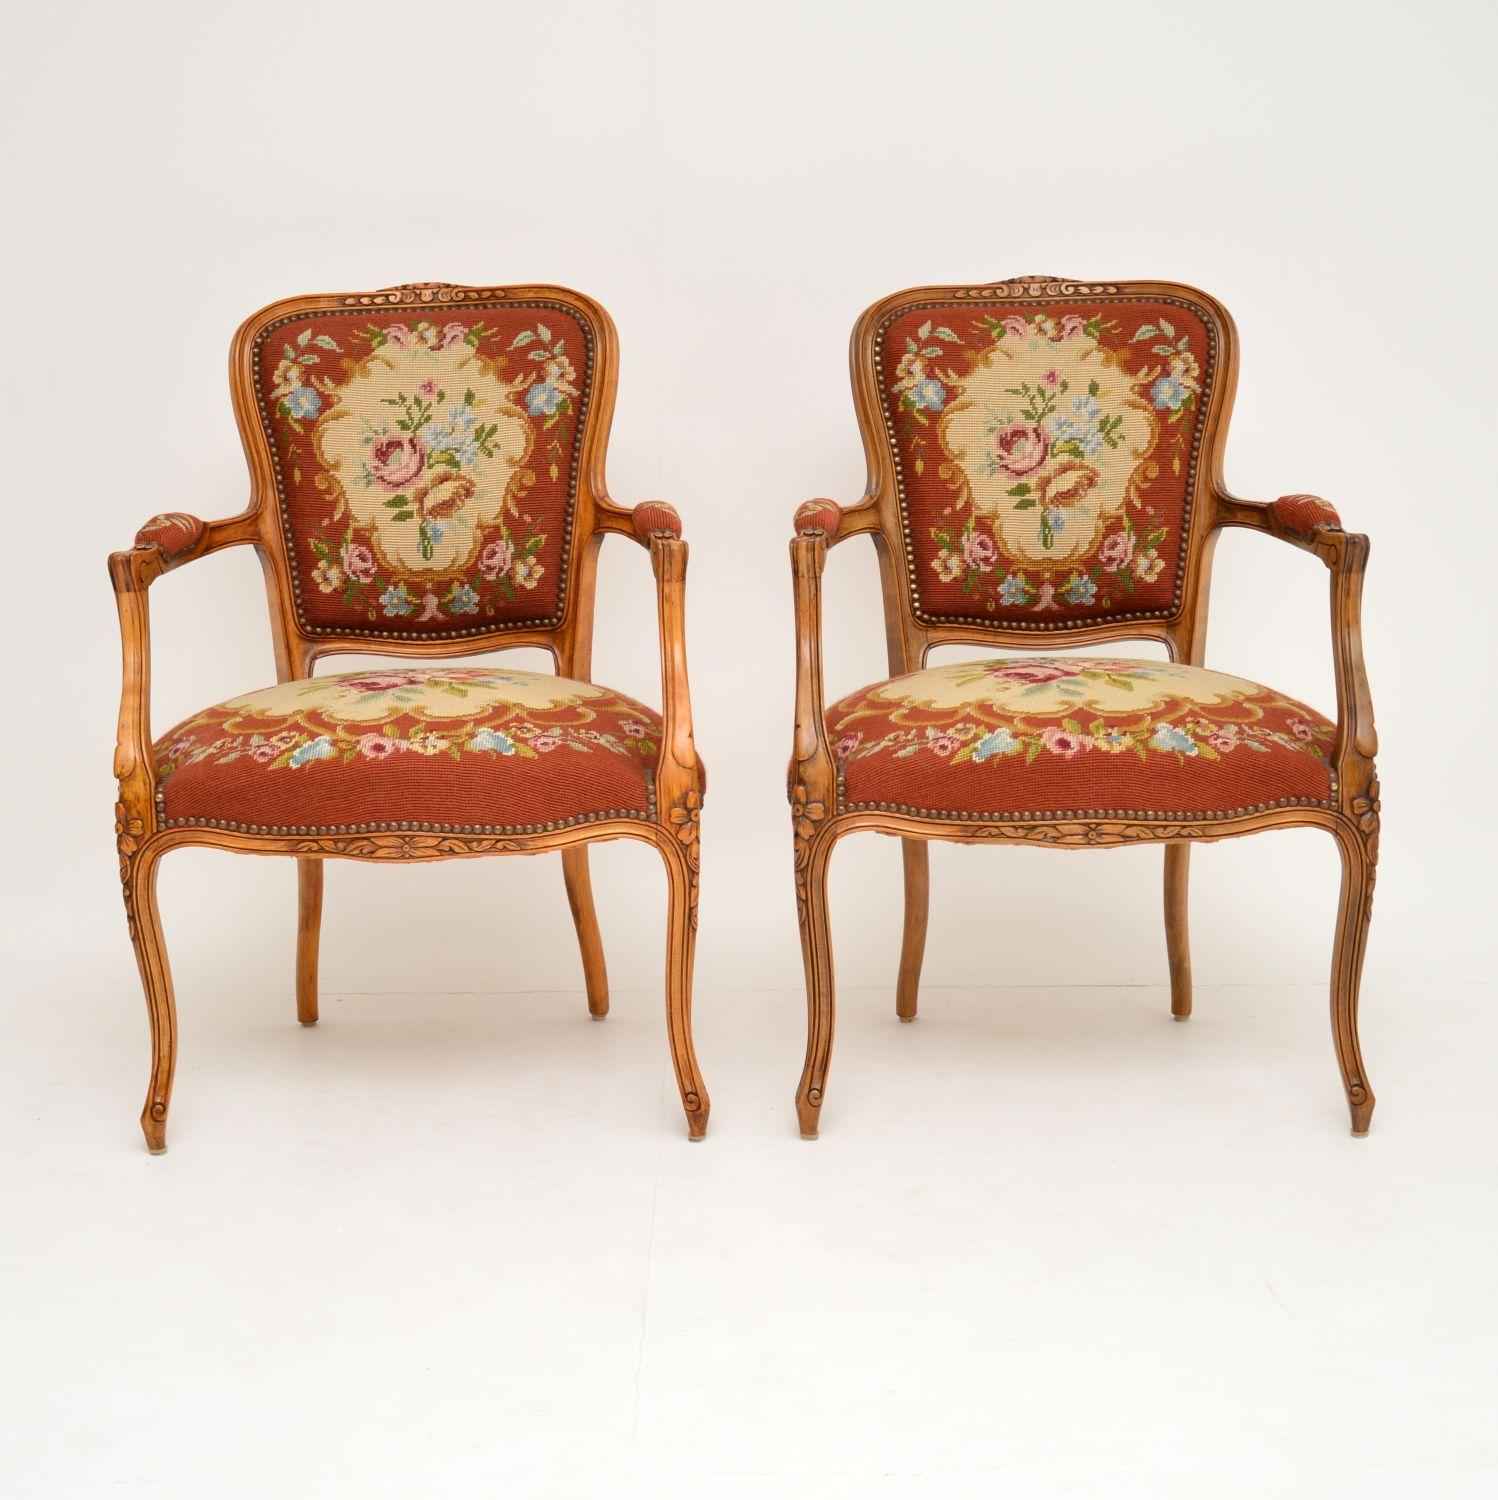 This pair of antique French salon armchairs are in excellent original condition & date from circa 1890-1910 period.

What’s nice, is that they still have the original needlepoint upholstery which is in very good condition. They have sturdy solid